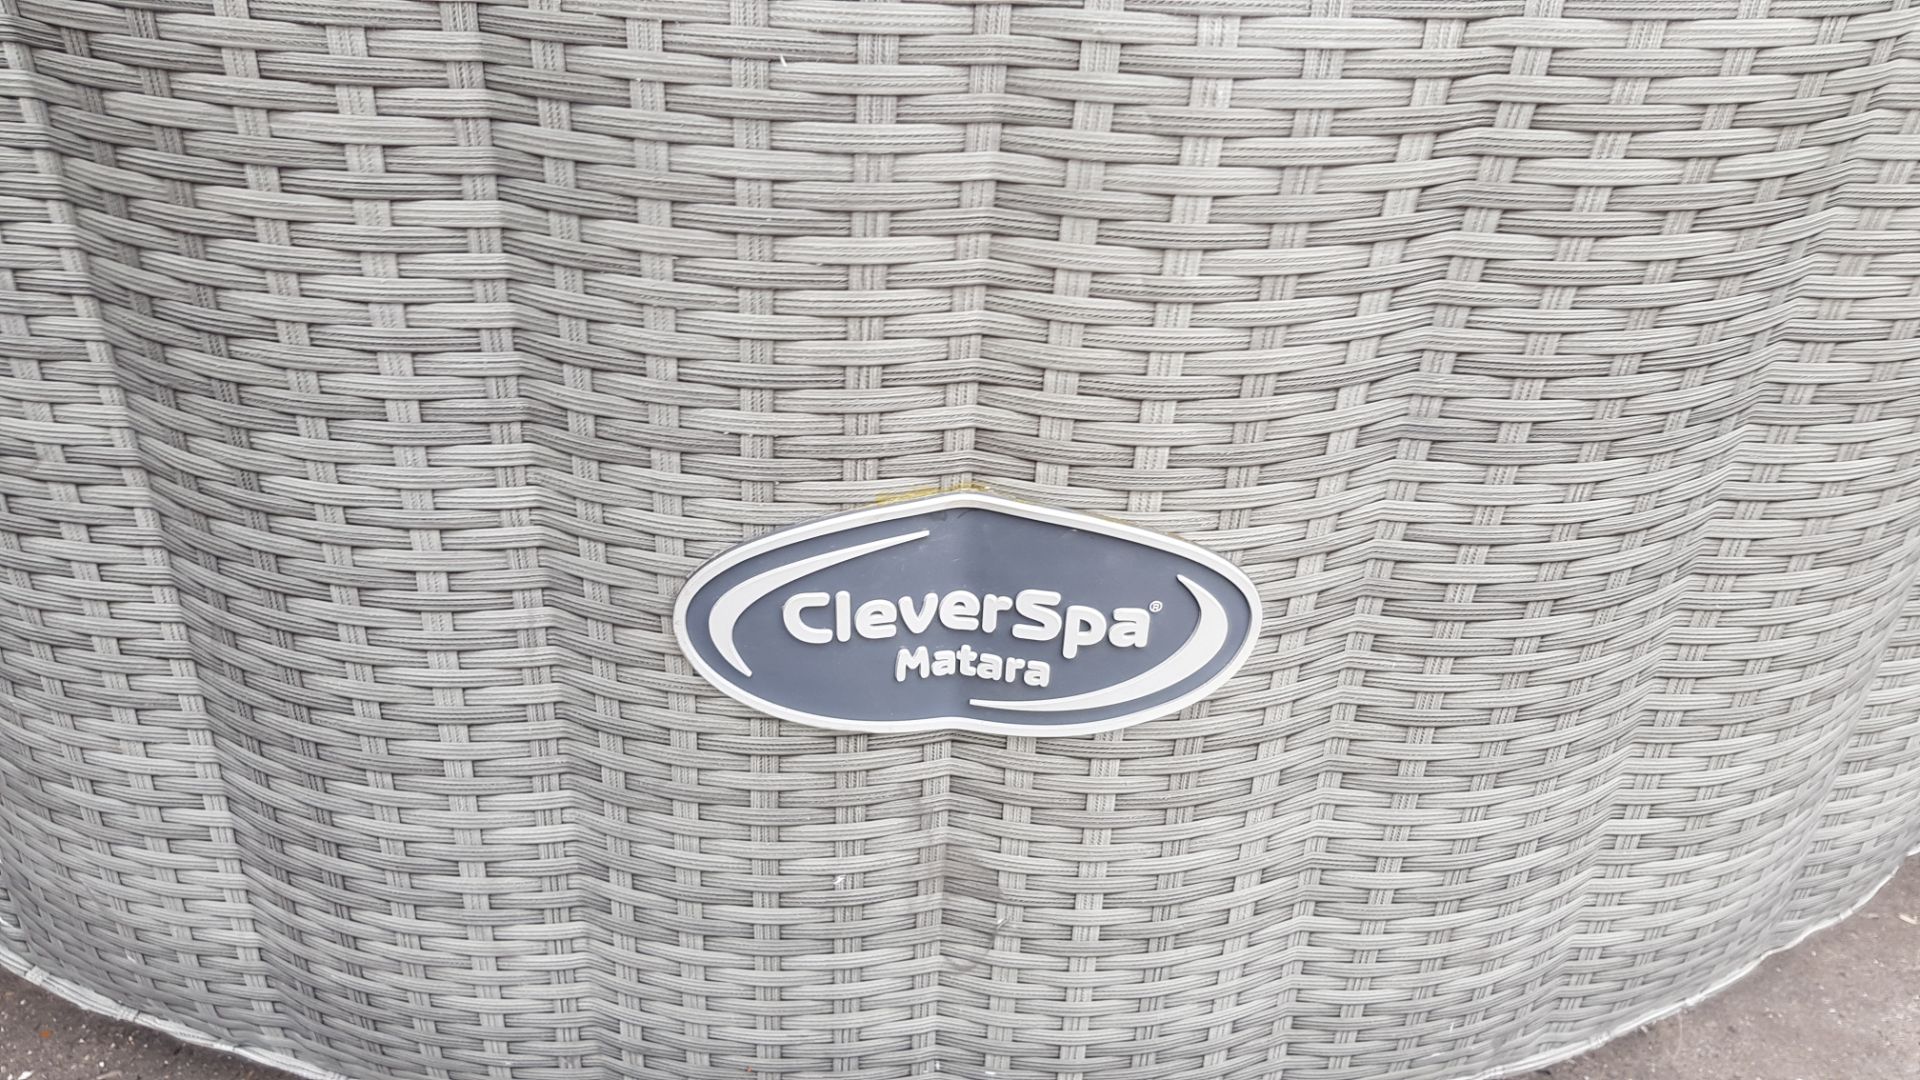 1x Clever Spa Matara RRP £500. 6 Person Inflatable 130 Air Jet Hot Tub. Unit Turns On & Inflates. W - Image 7 of 10